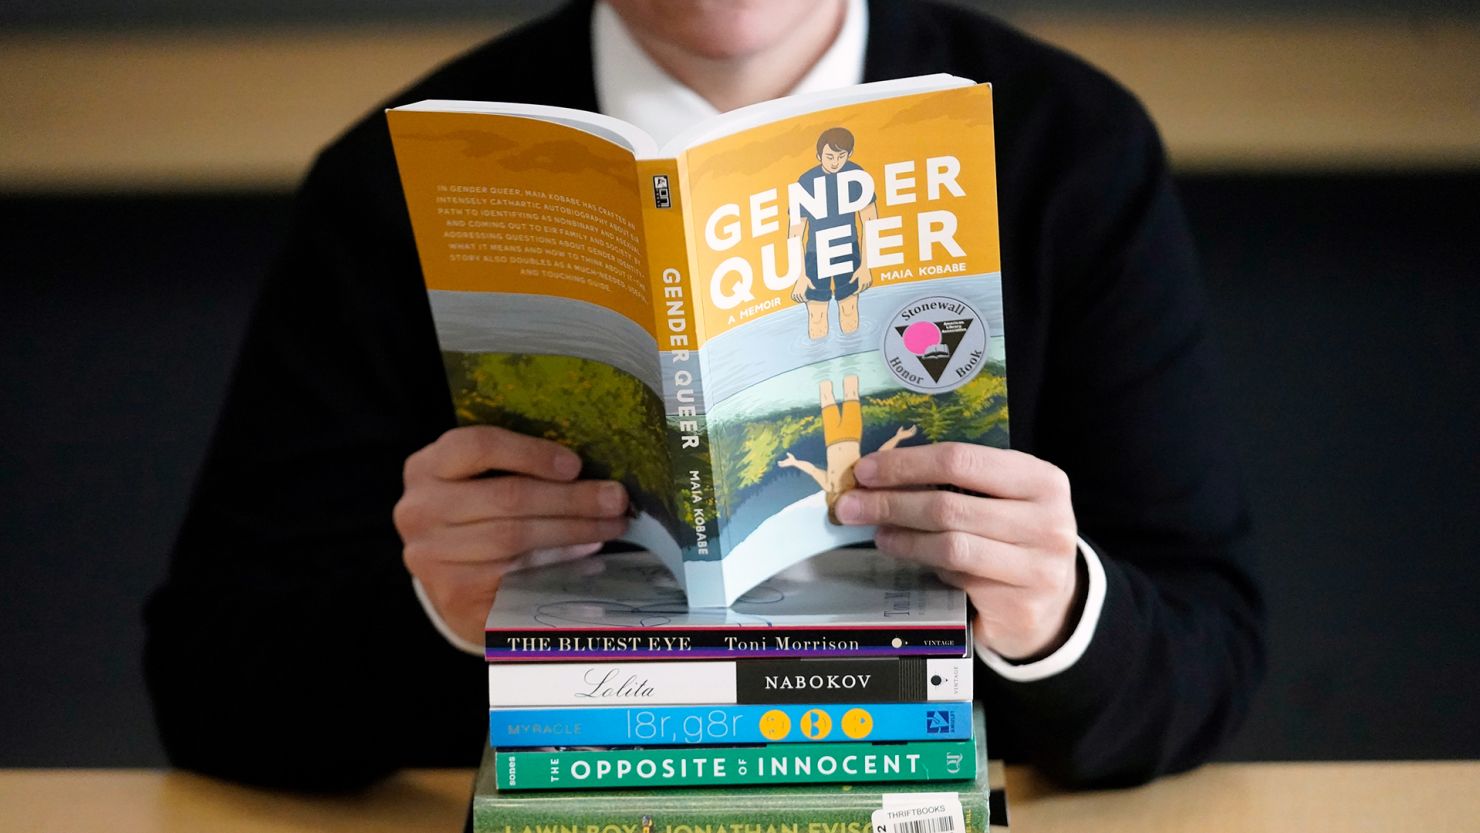 More than a dozen book bans restrict students' access to "Gender Queer" by Maia Kobabe in public schools during the first half of the 2022-2023 school year, PEN America says.